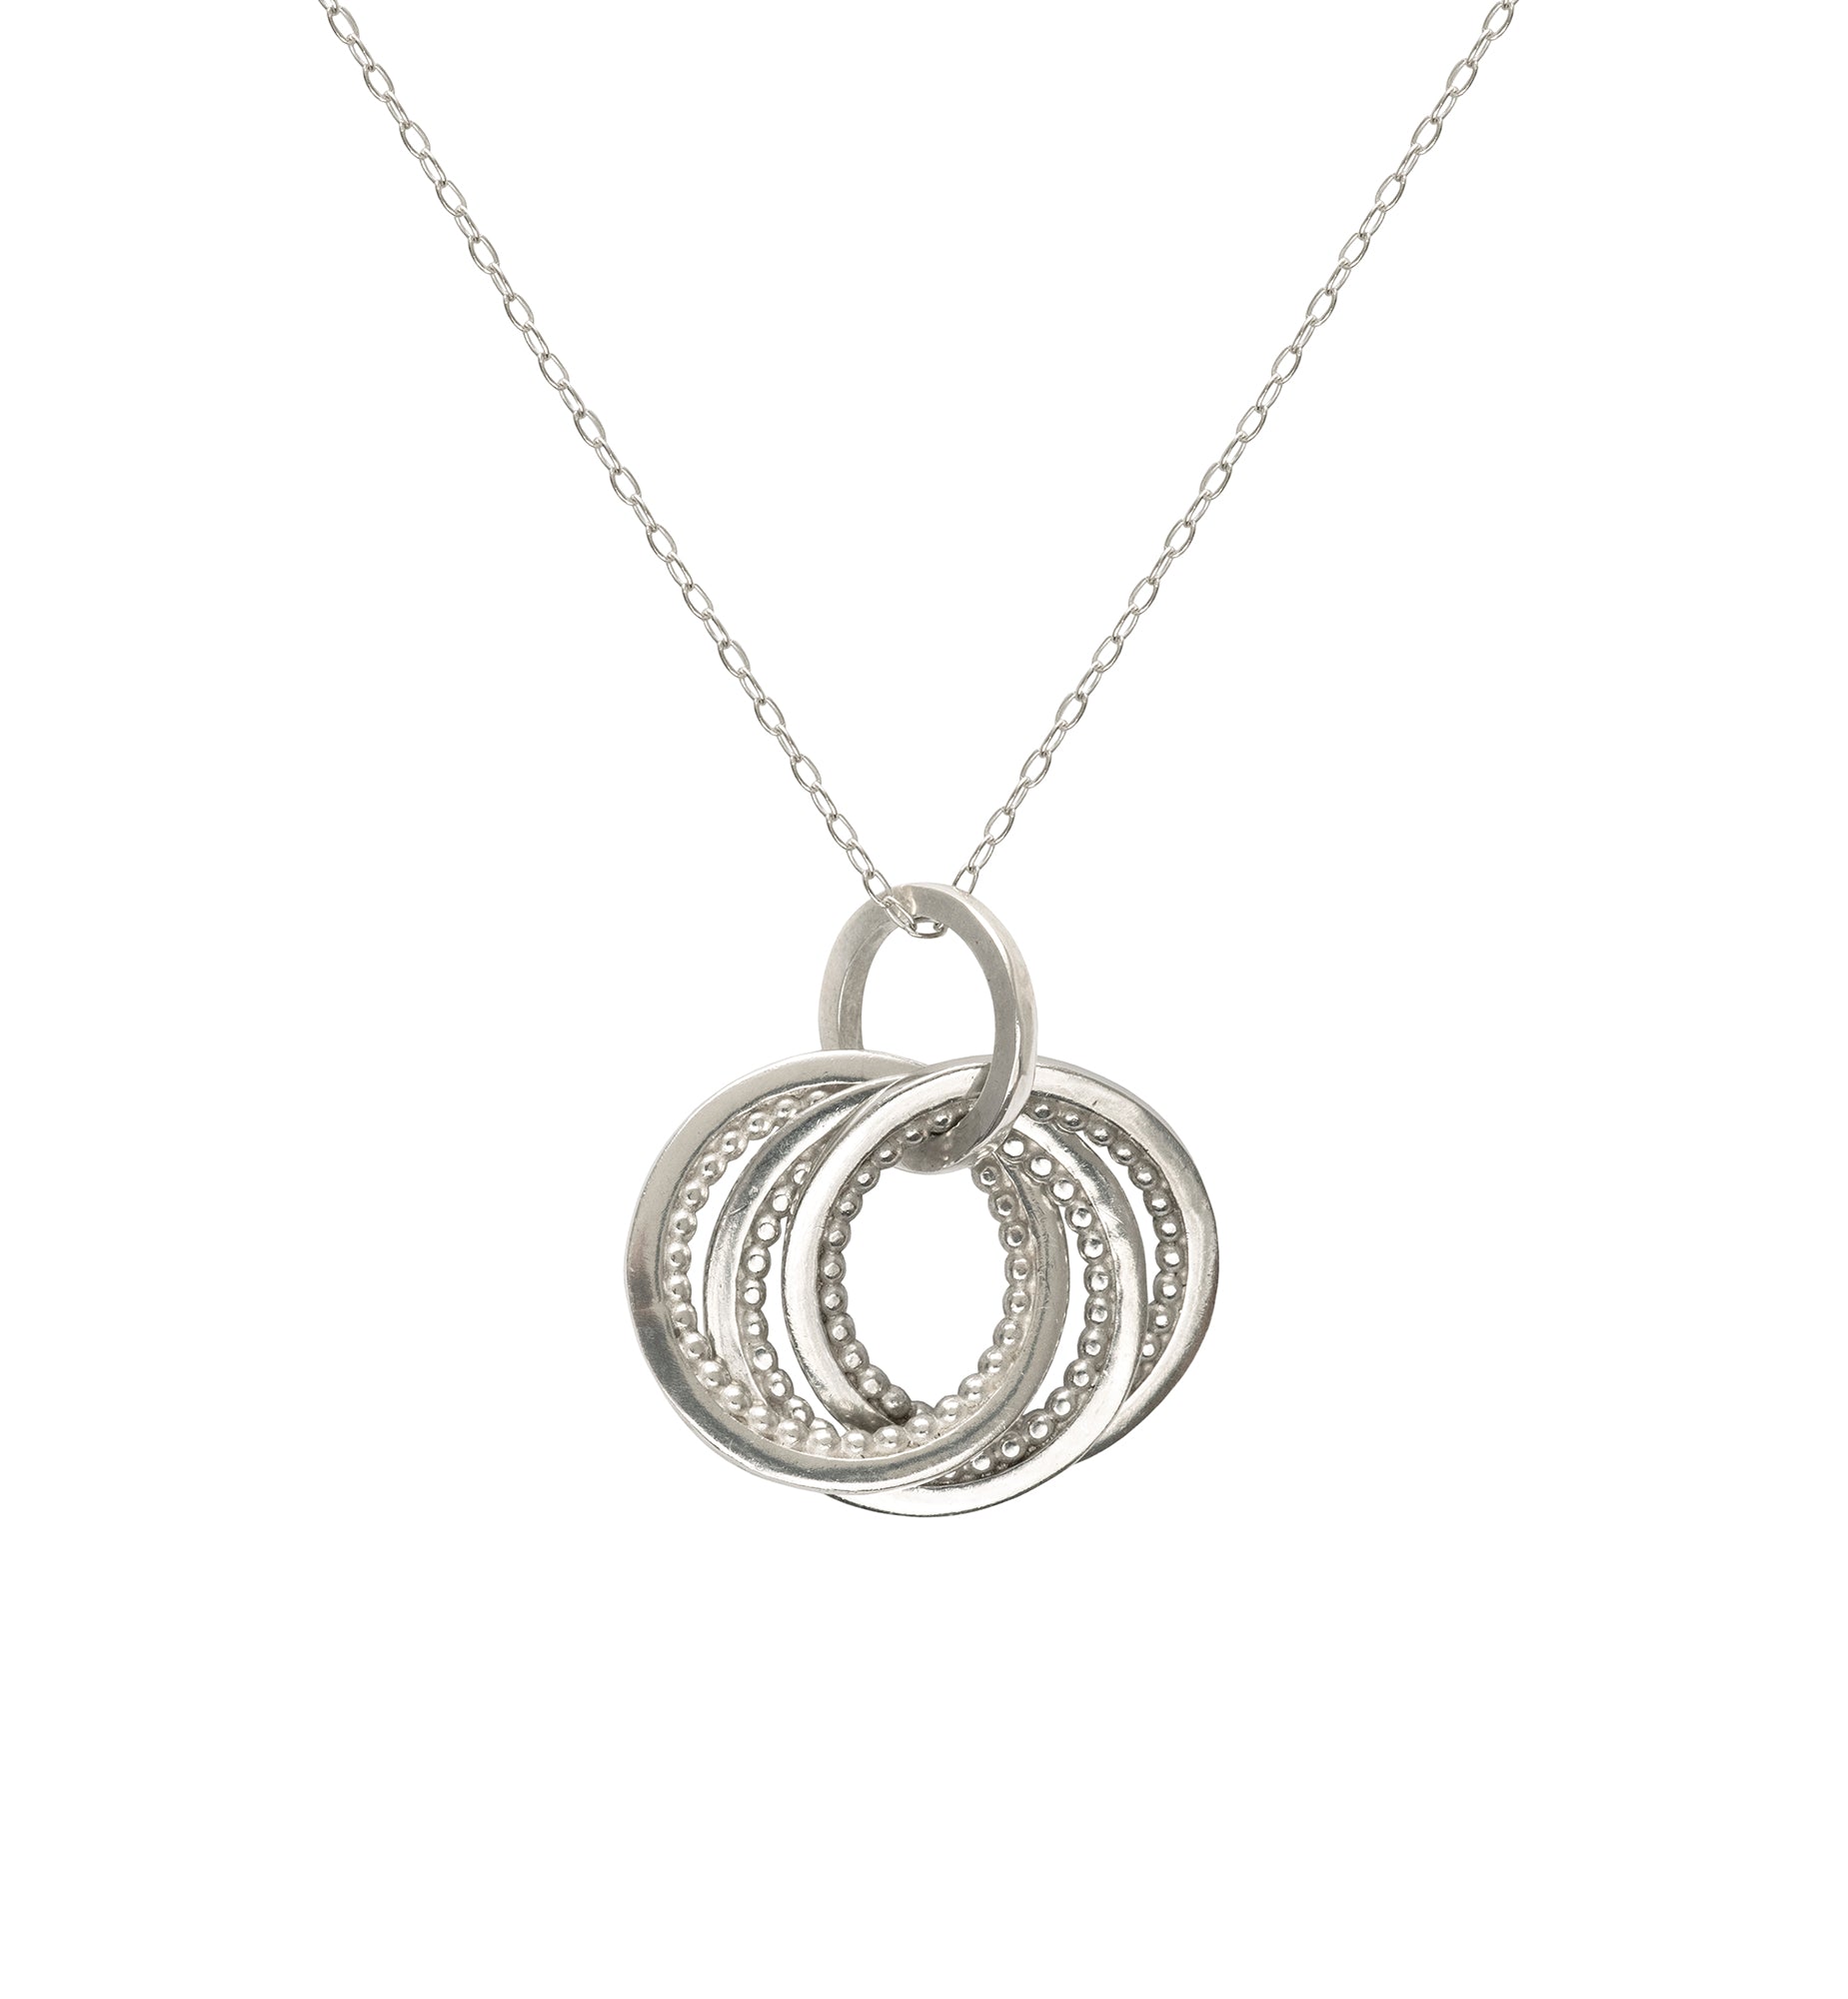 Intertwining Meridian Necklace